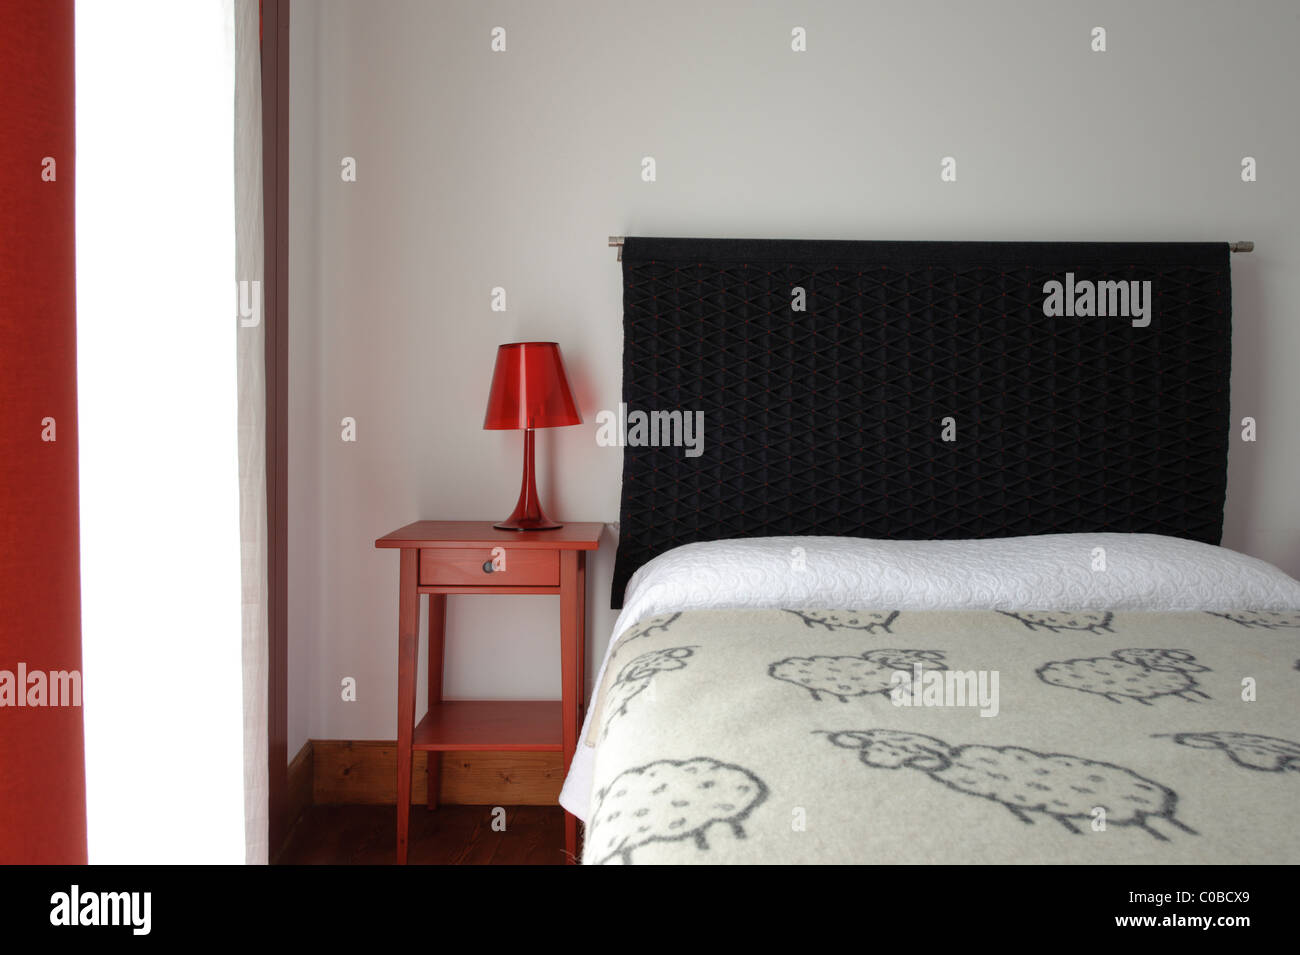 Bedroom bed with bedside table with red lamp Stock Photo